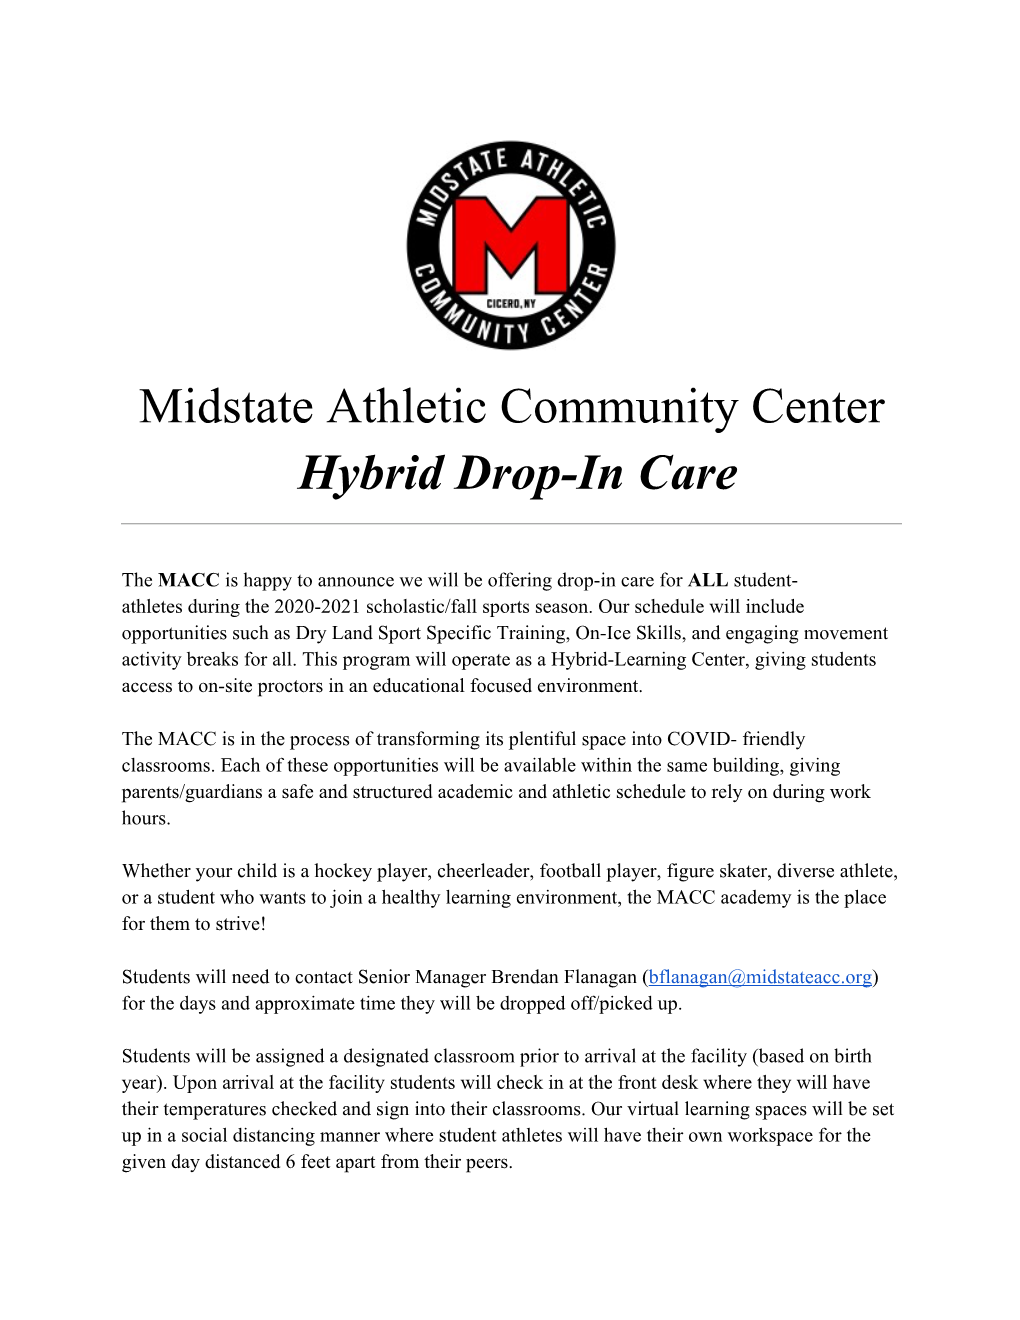 Midstate Athletic Community Center Hybrid Drop-In Care